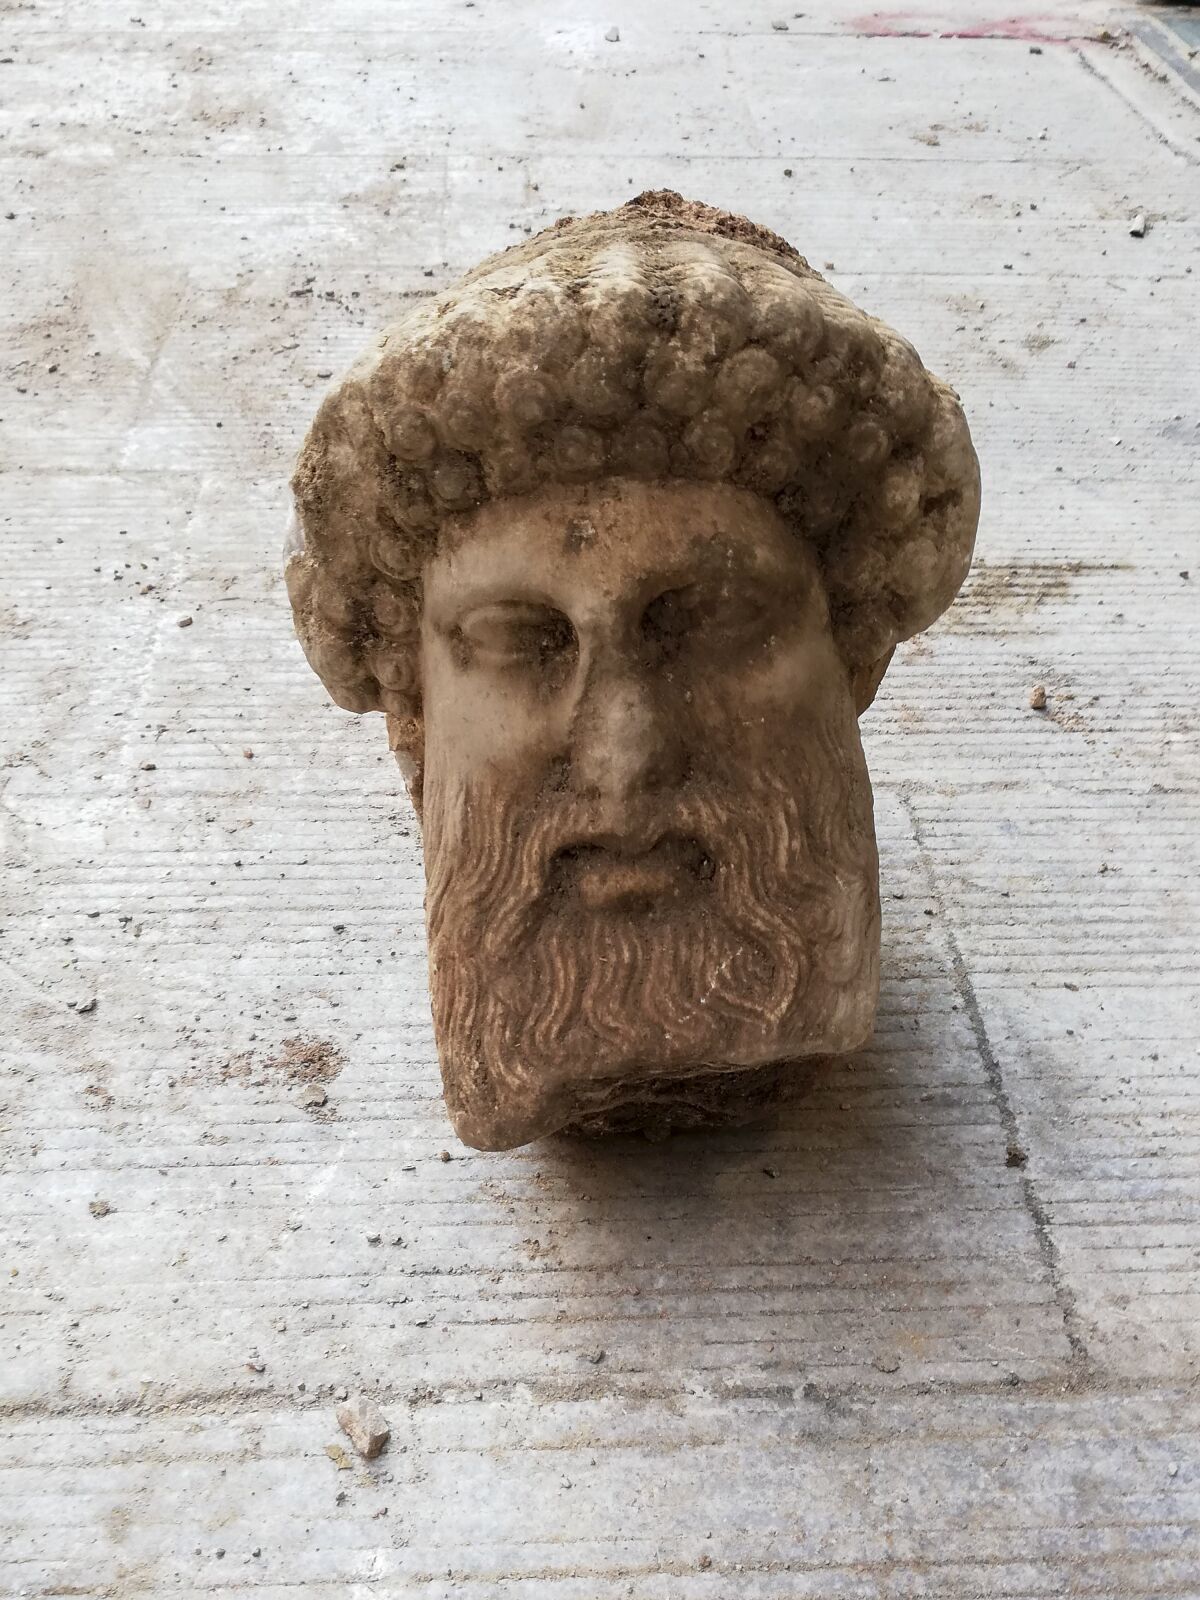 In this undated photo, provided by the Greek Culture Ministry on Sunday, Nov. 15, 2020, a head of the ancient god Hermes is pictured after being found during sewage works in central Athens. The ministry said Sunday that the head, depicting Hermes at a "mature age", one of many that served as street markers in ancient Athens, appears to be from around 300 BC, that is, either from the late 4th century BC, or the early 3rd century. (Greek Culture Ministry via AP)